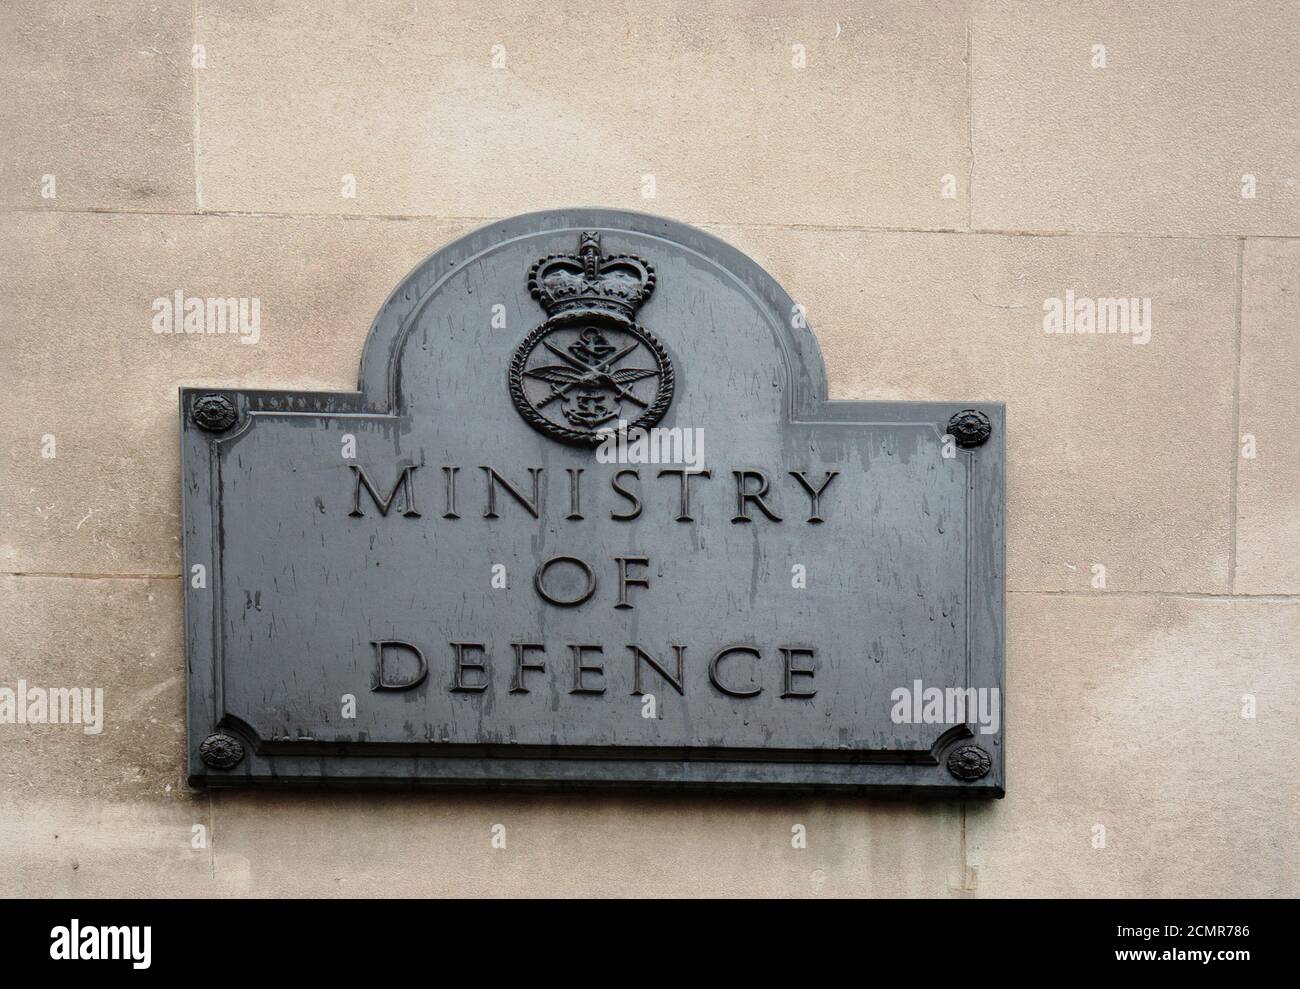 Ministry of Defence plaque.  This is located on the wall of the MOD building in whitehall gardens, London.  It is a Grade 1 Listed Building and is res Stock Photo